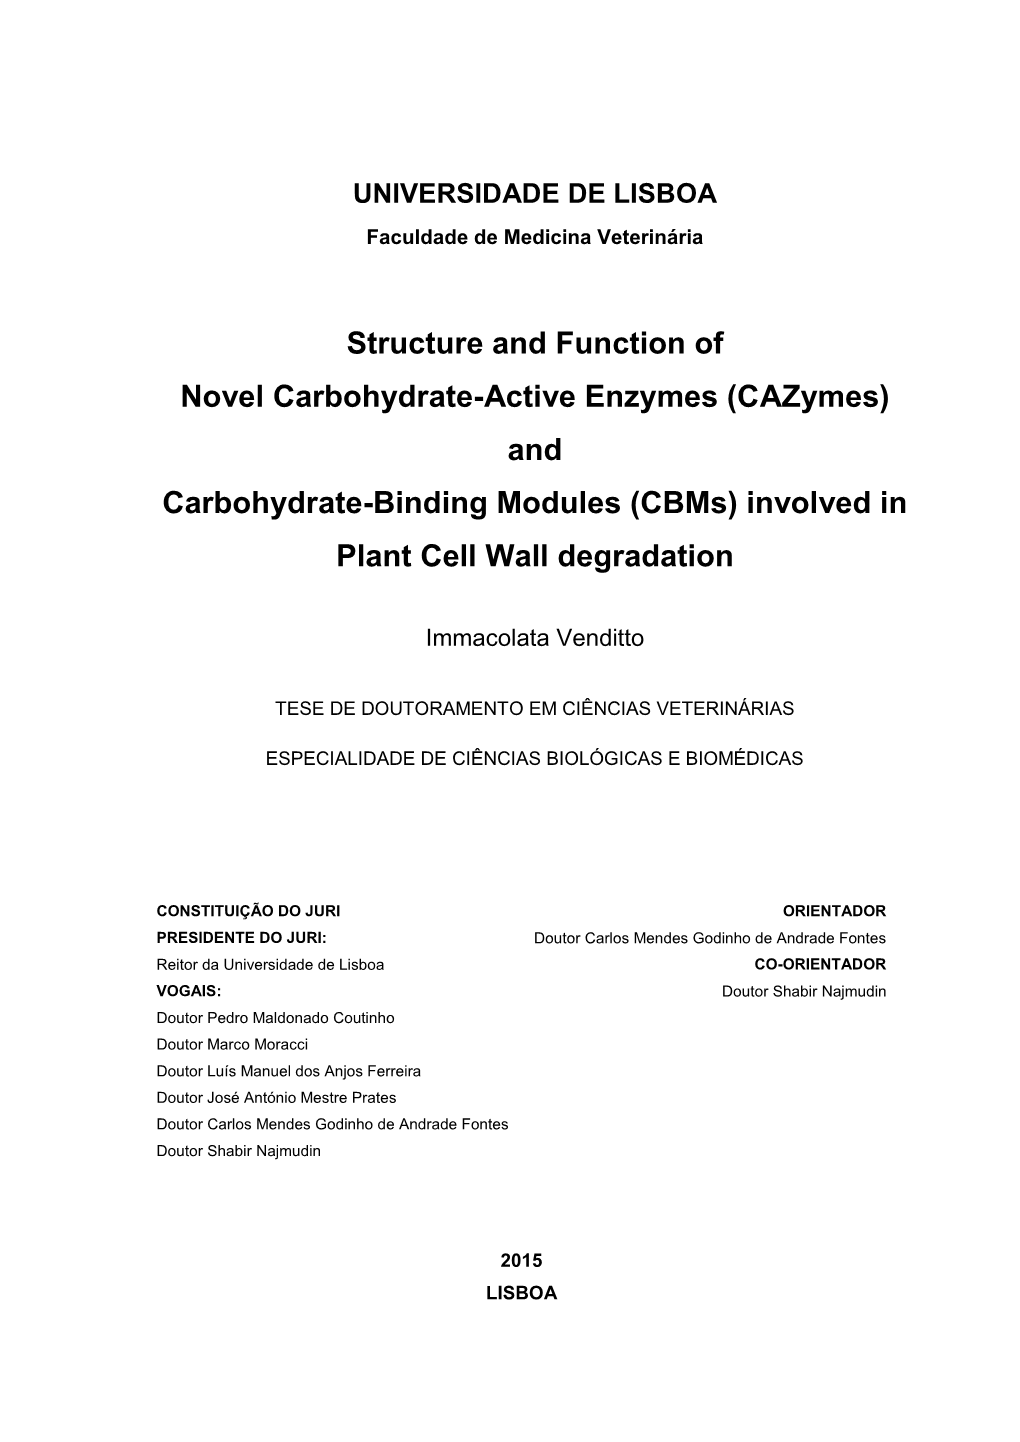 (Cazymes) and Carbohydrate-Binding Modules (Cbms) Involved in Plant Cell Wall Degradation